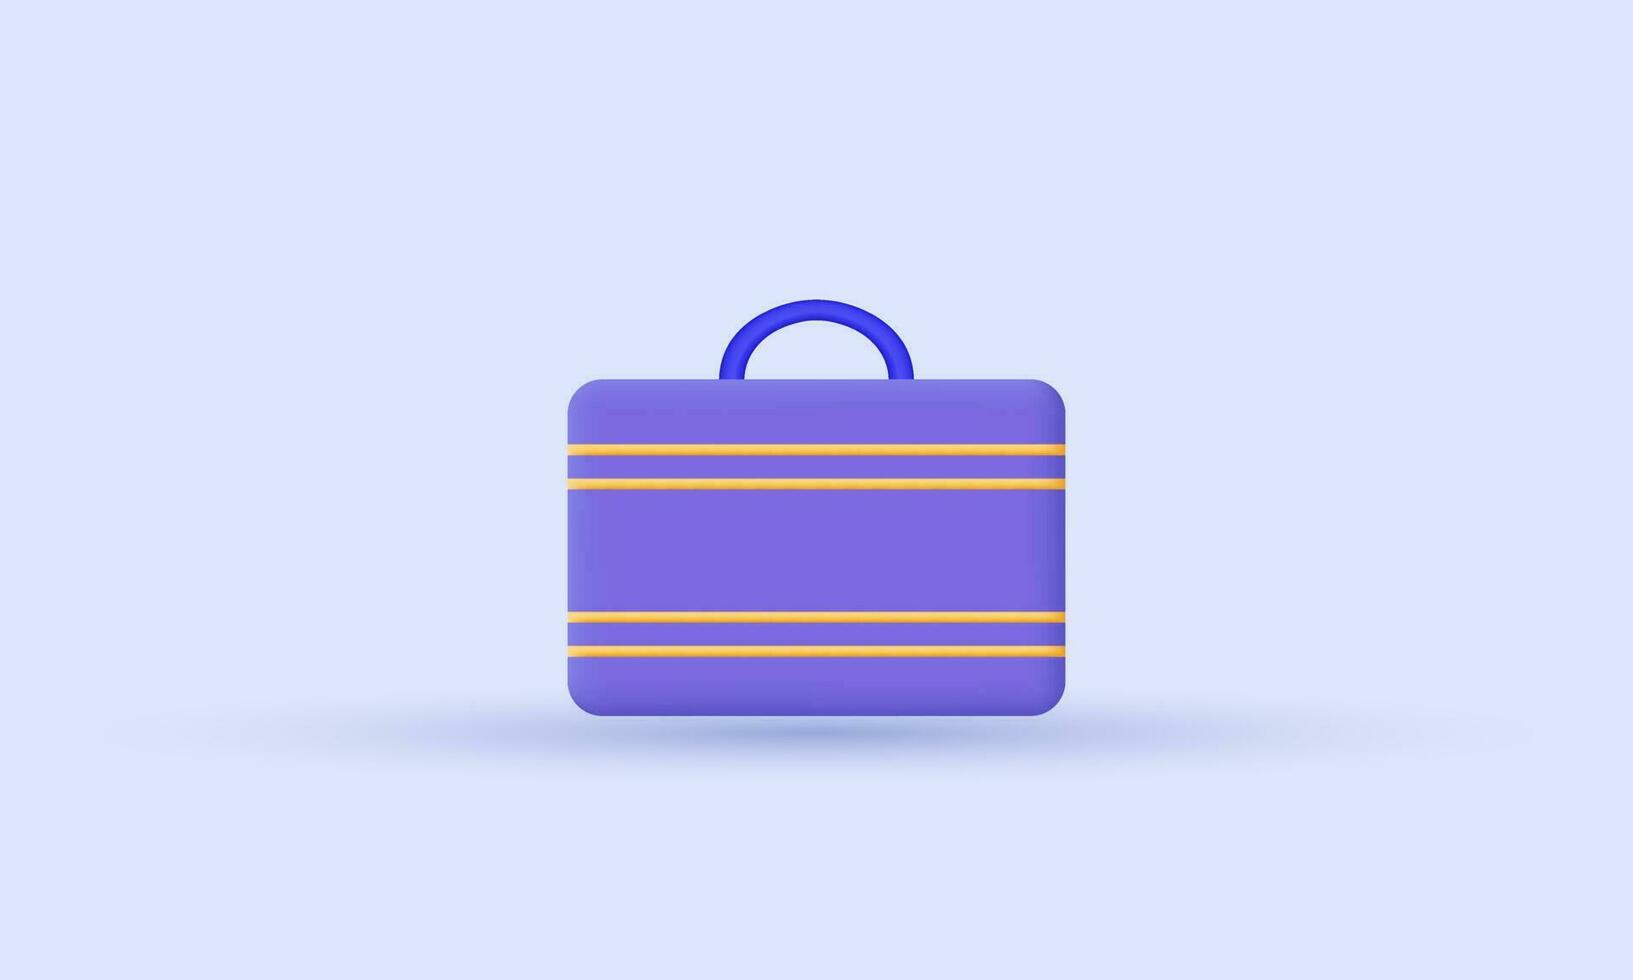 illustration creative businessman briefcase schoolbag education learning business 3d vector icon symbols isolated on background